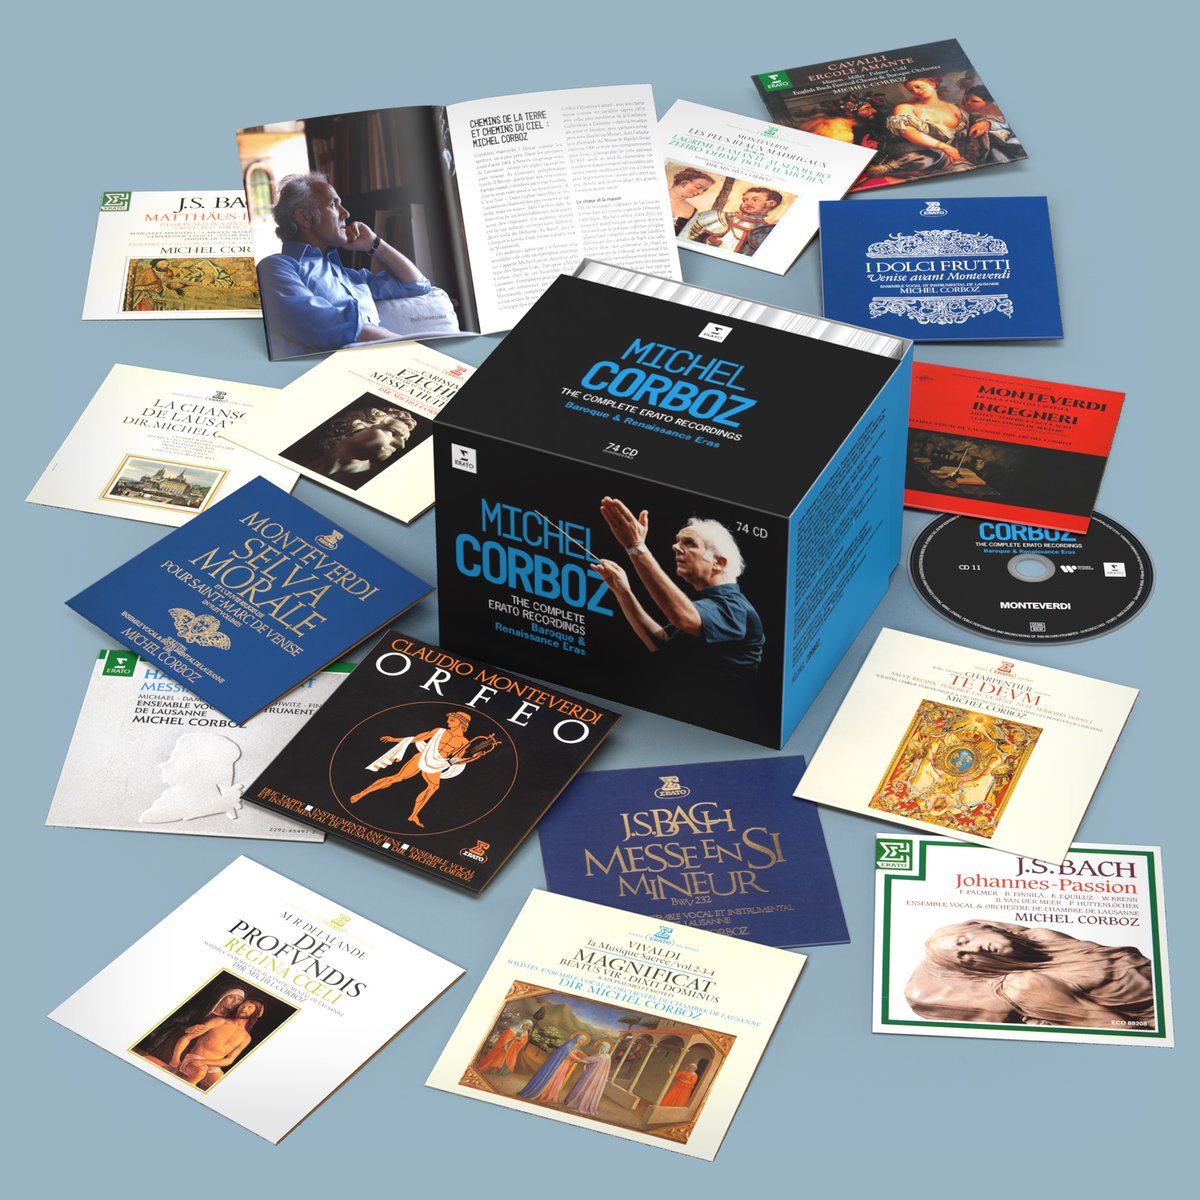 Dedicated largely to accompanied and unaccompanied vocal music, this vast 74-disc collection compiles all the Erato recordings that the late Swiss conductor Michel Corboz made of repertoire from the Baroque and Renaissance Eras. Out now: w.lnk.to/emcTW